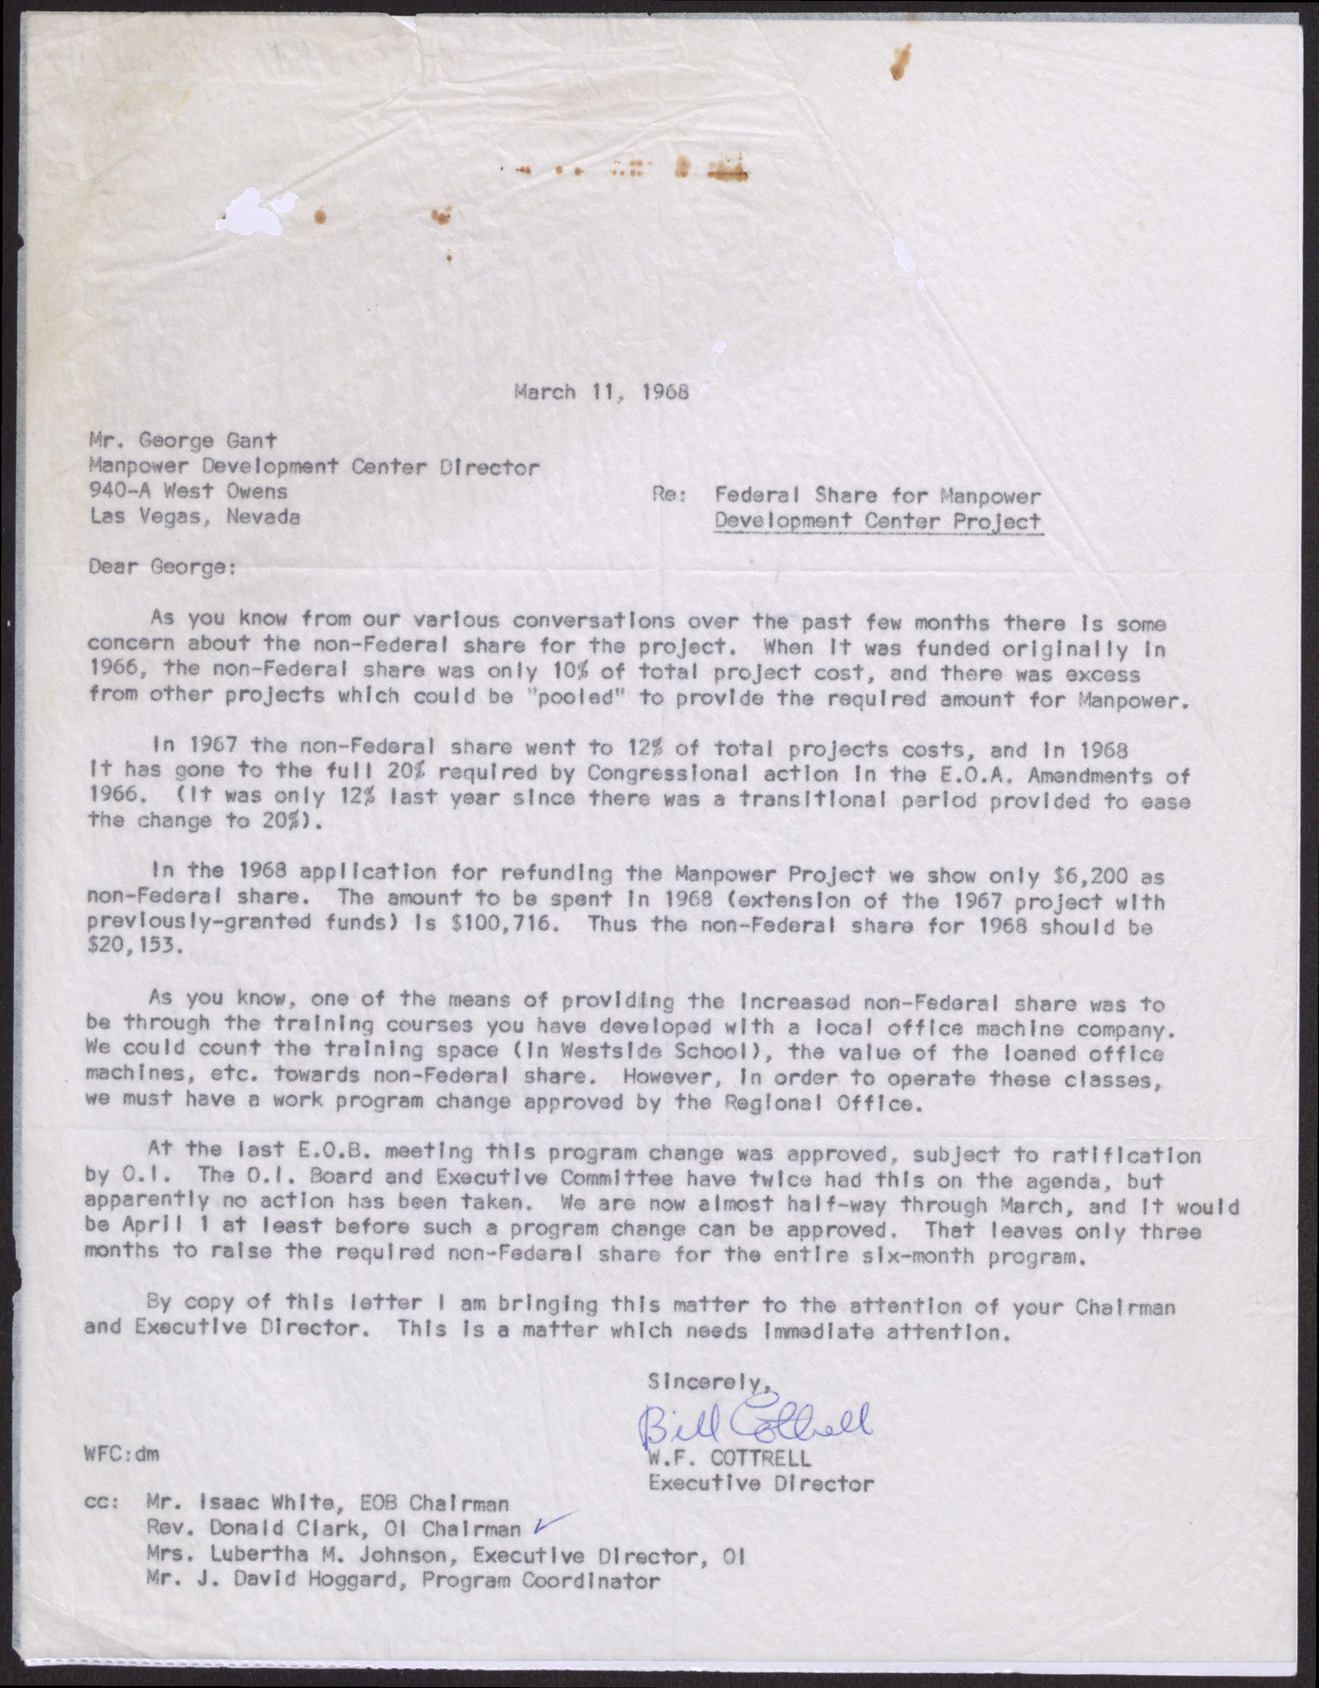 Letter to Mr. George W. Gant from W. F. Cottrell, March 11, 1968